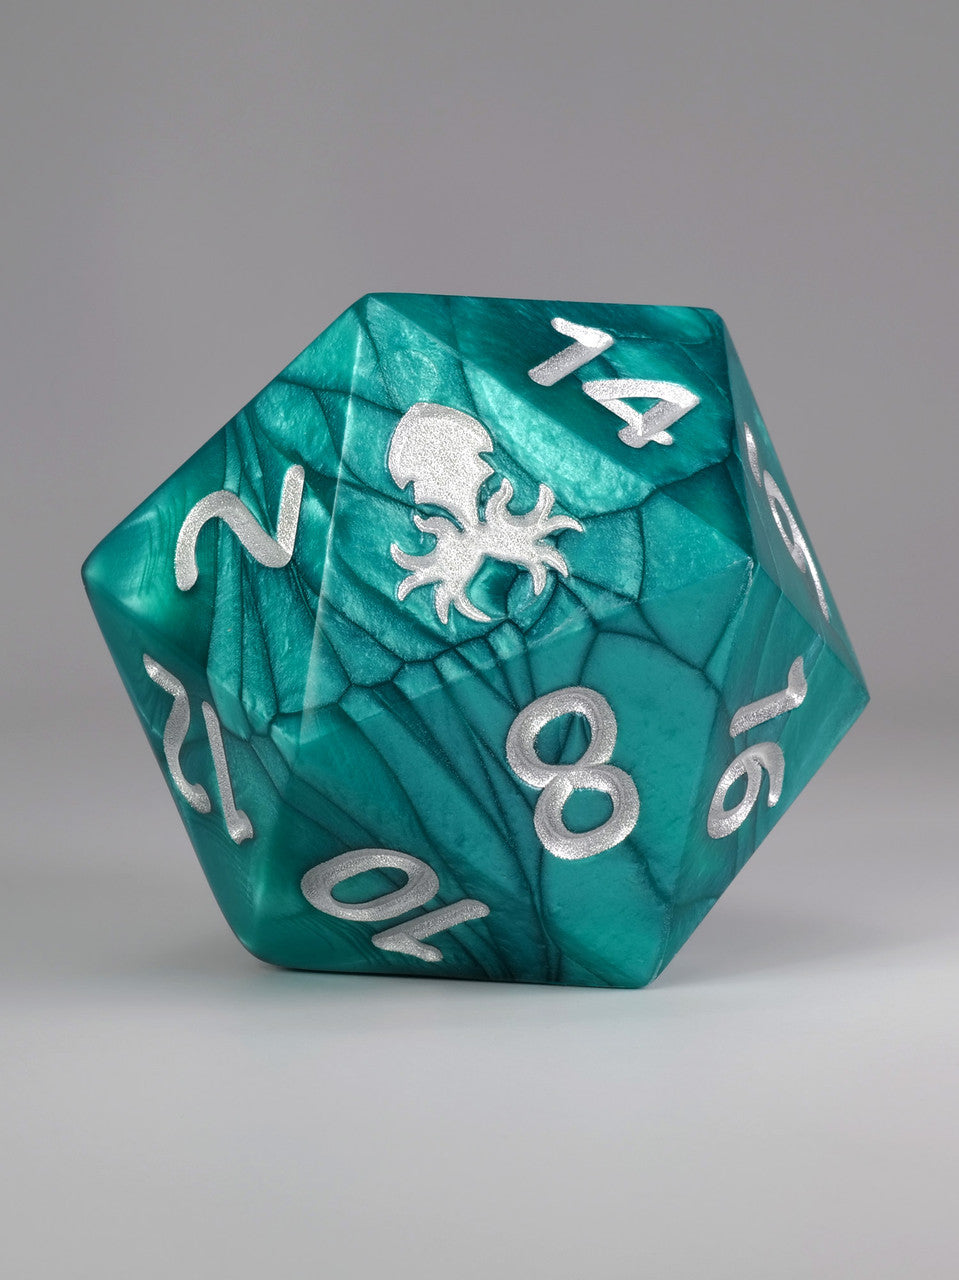 Teal with Silver Ink Hand Polished Sharp Edge 55mm D20